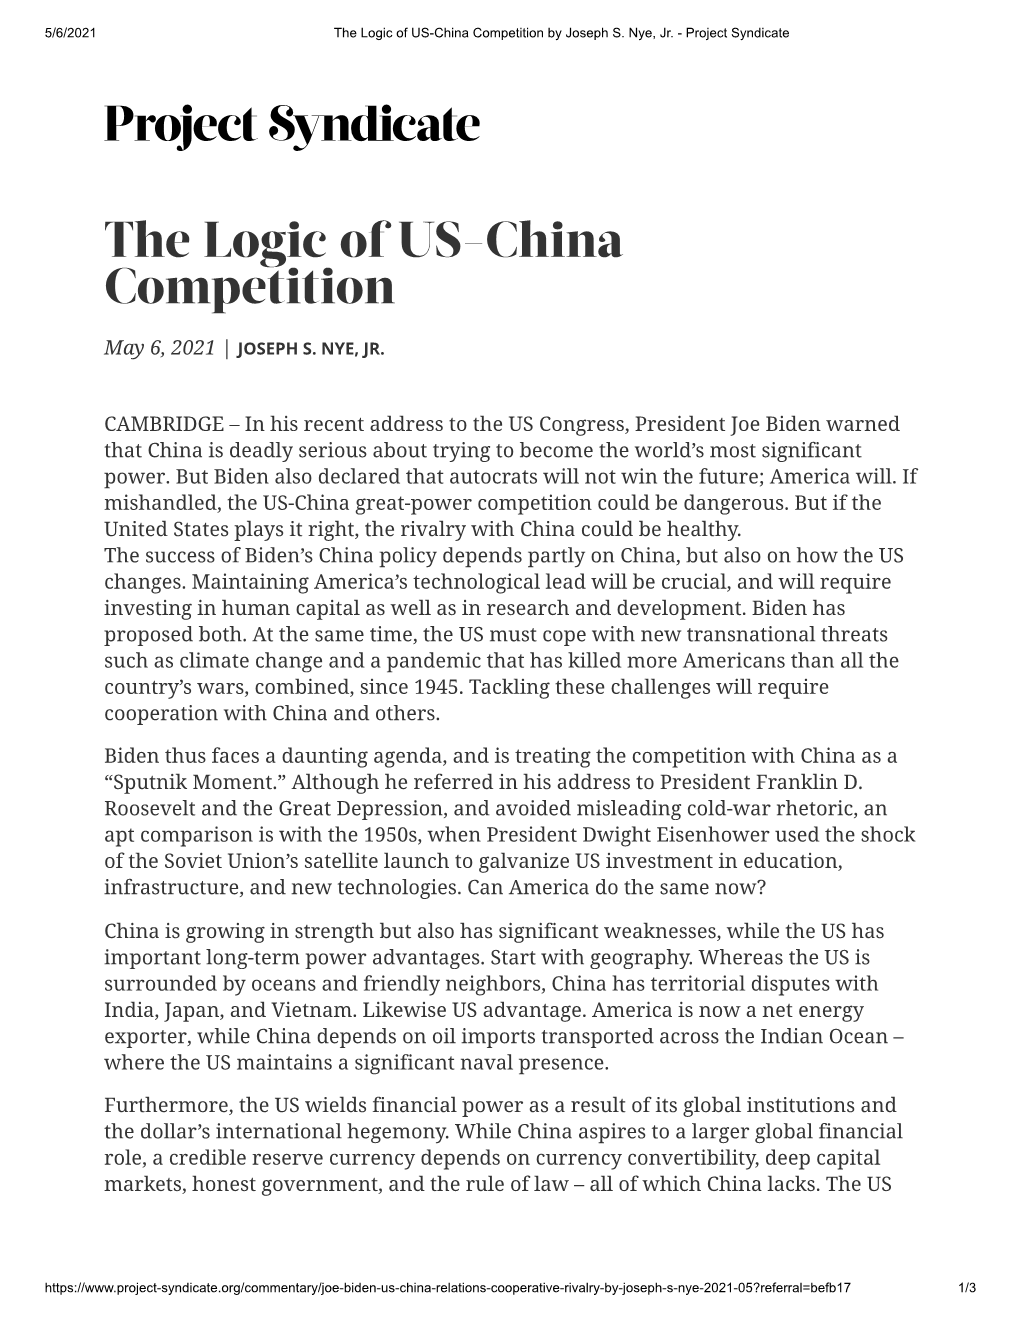 The Logic of US-China Competition by Joseph S